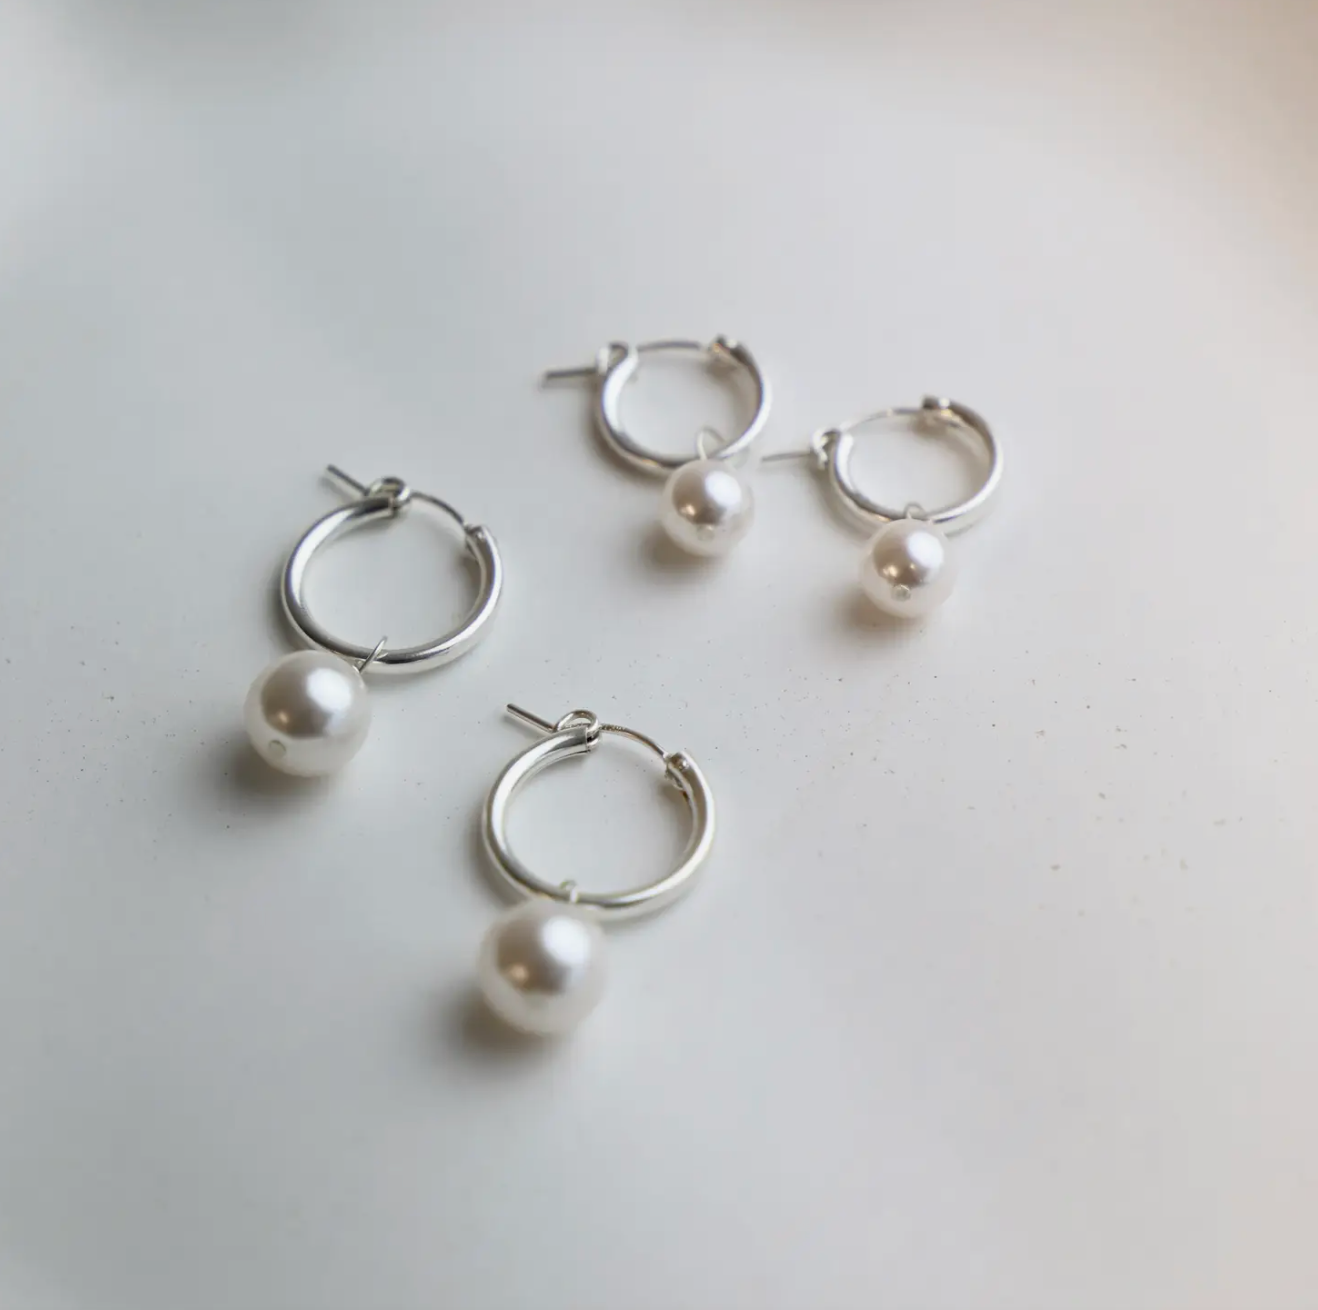 Audrey Pearl Earrings - Two Sizes - Silver